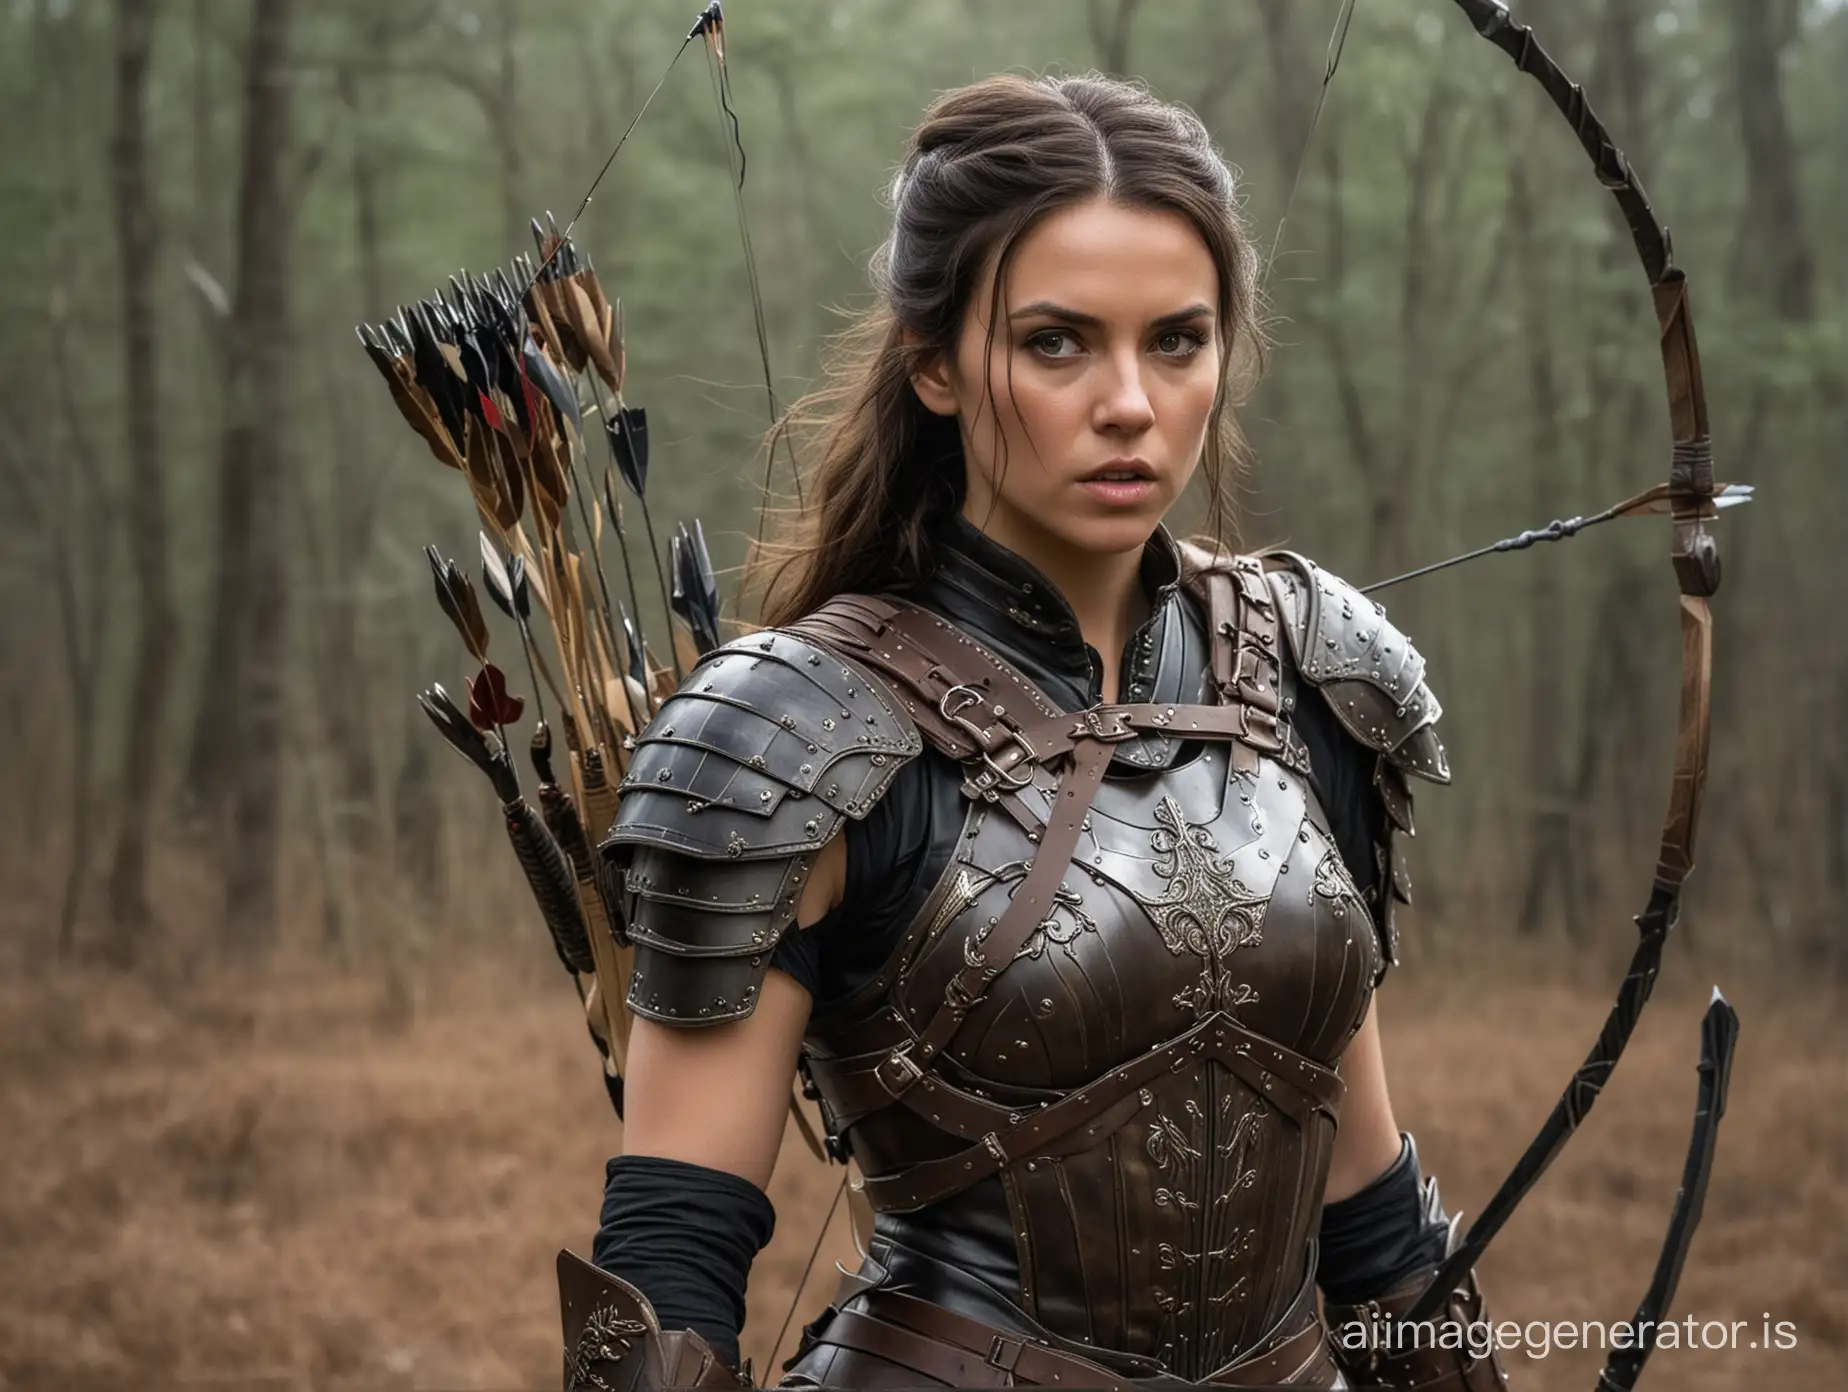 Brunette-Woman-in-Armor-with-Bow-and-Arrows-and-Knife